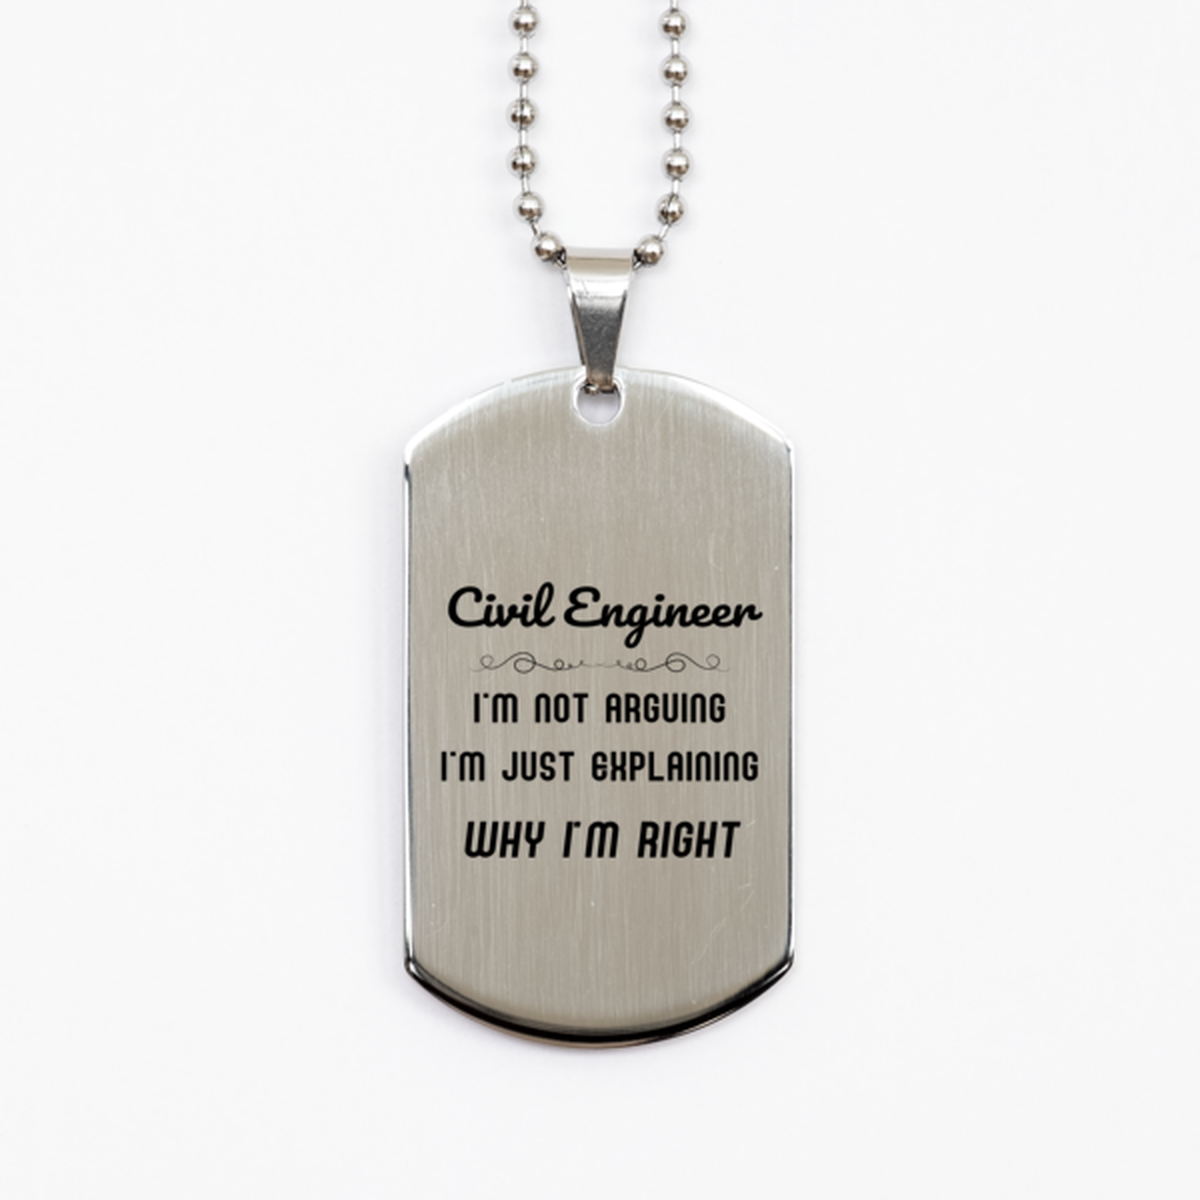 Civil Engineer I'm not Arguing. I'm Just Explaining Why I'm RIGHT Silver Dog Tag, Funny Saying Quote Civil Engineer Gifts For Civil Engineer Graduation Birthday Christmas Gifts for Men Women Coworker